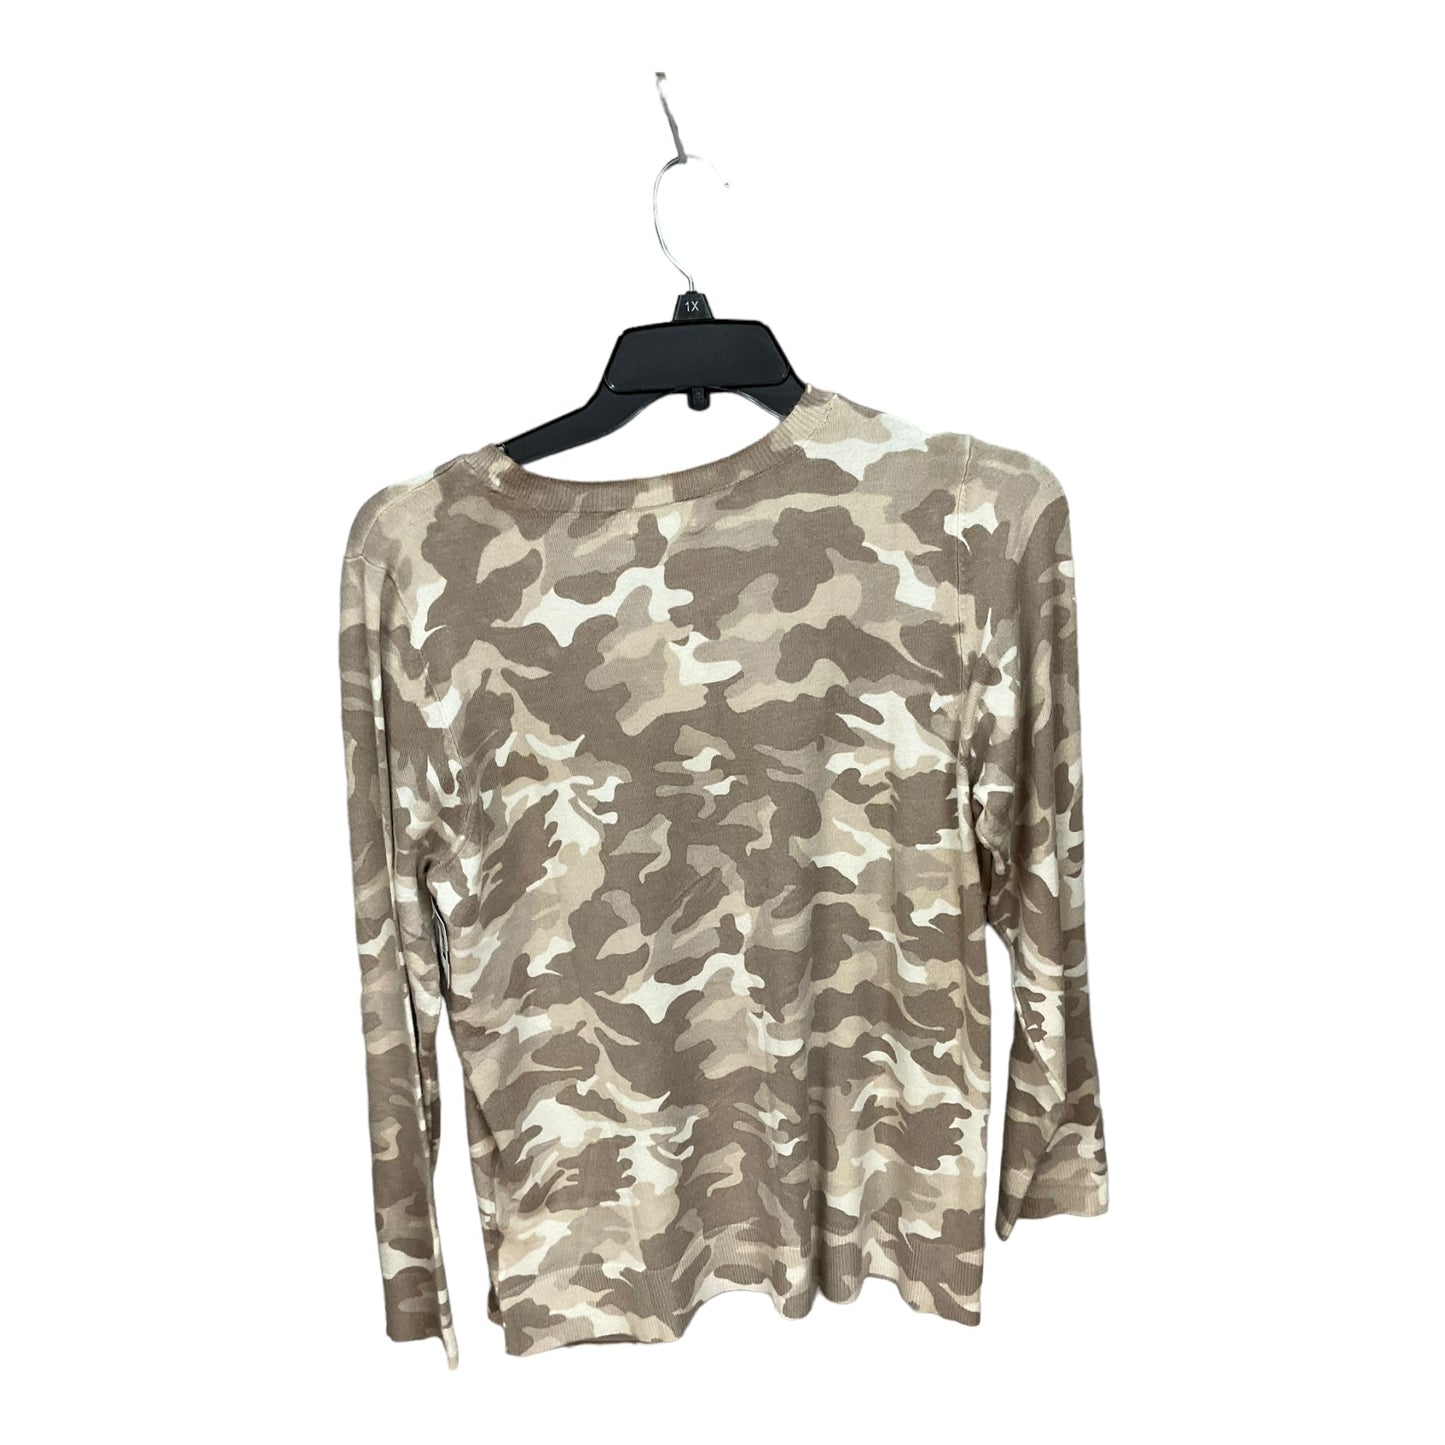 Camouflage Print Top Long Sleeve Basic Style And Company, Size Xl